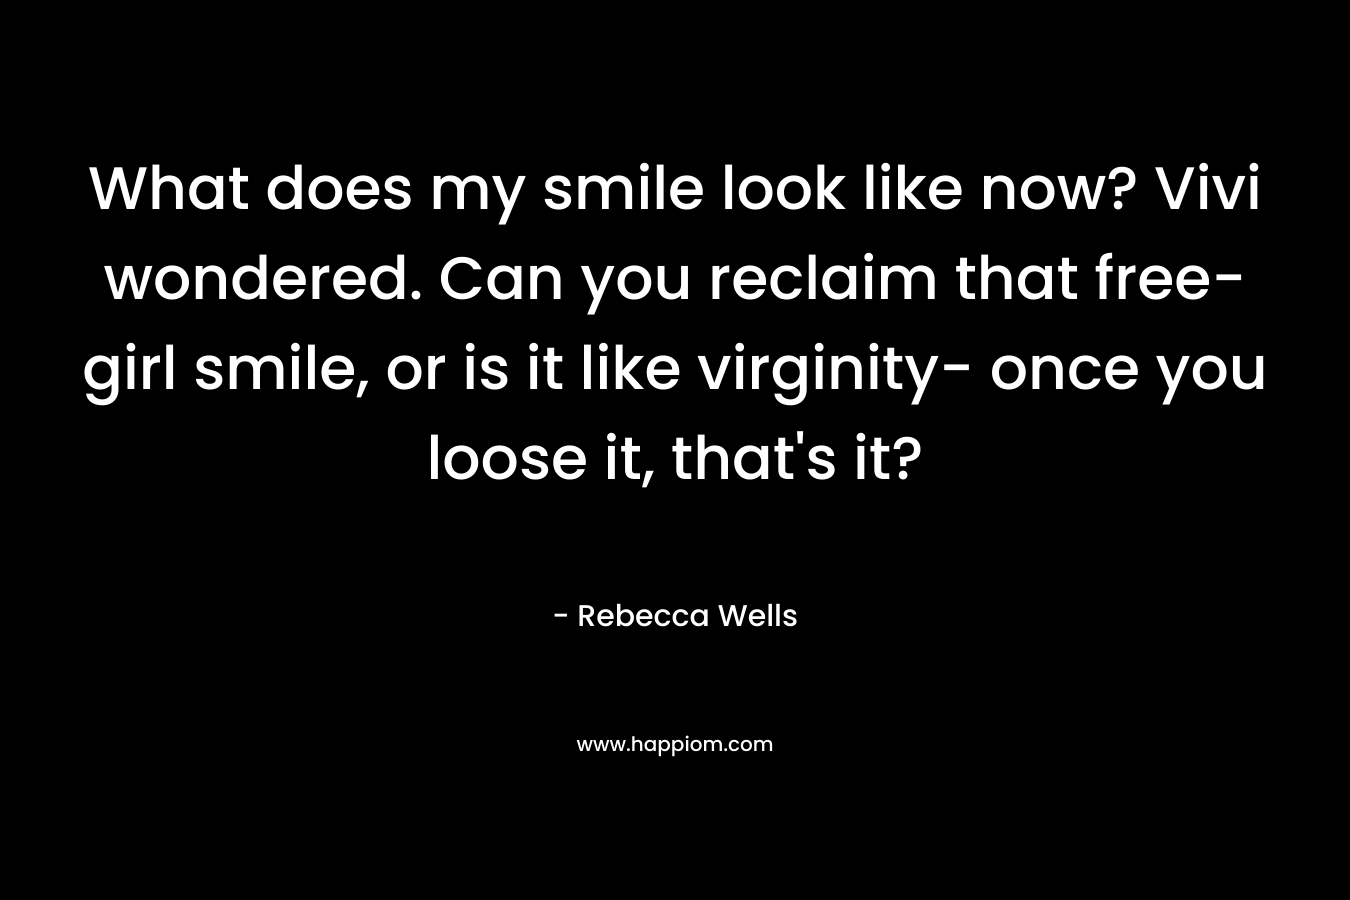 What does my smile look like now? Vivi wondered. Can you reclaim that free-girl smile, or is it like virginity- once you loose it, that’s it? – Rebecca Wells